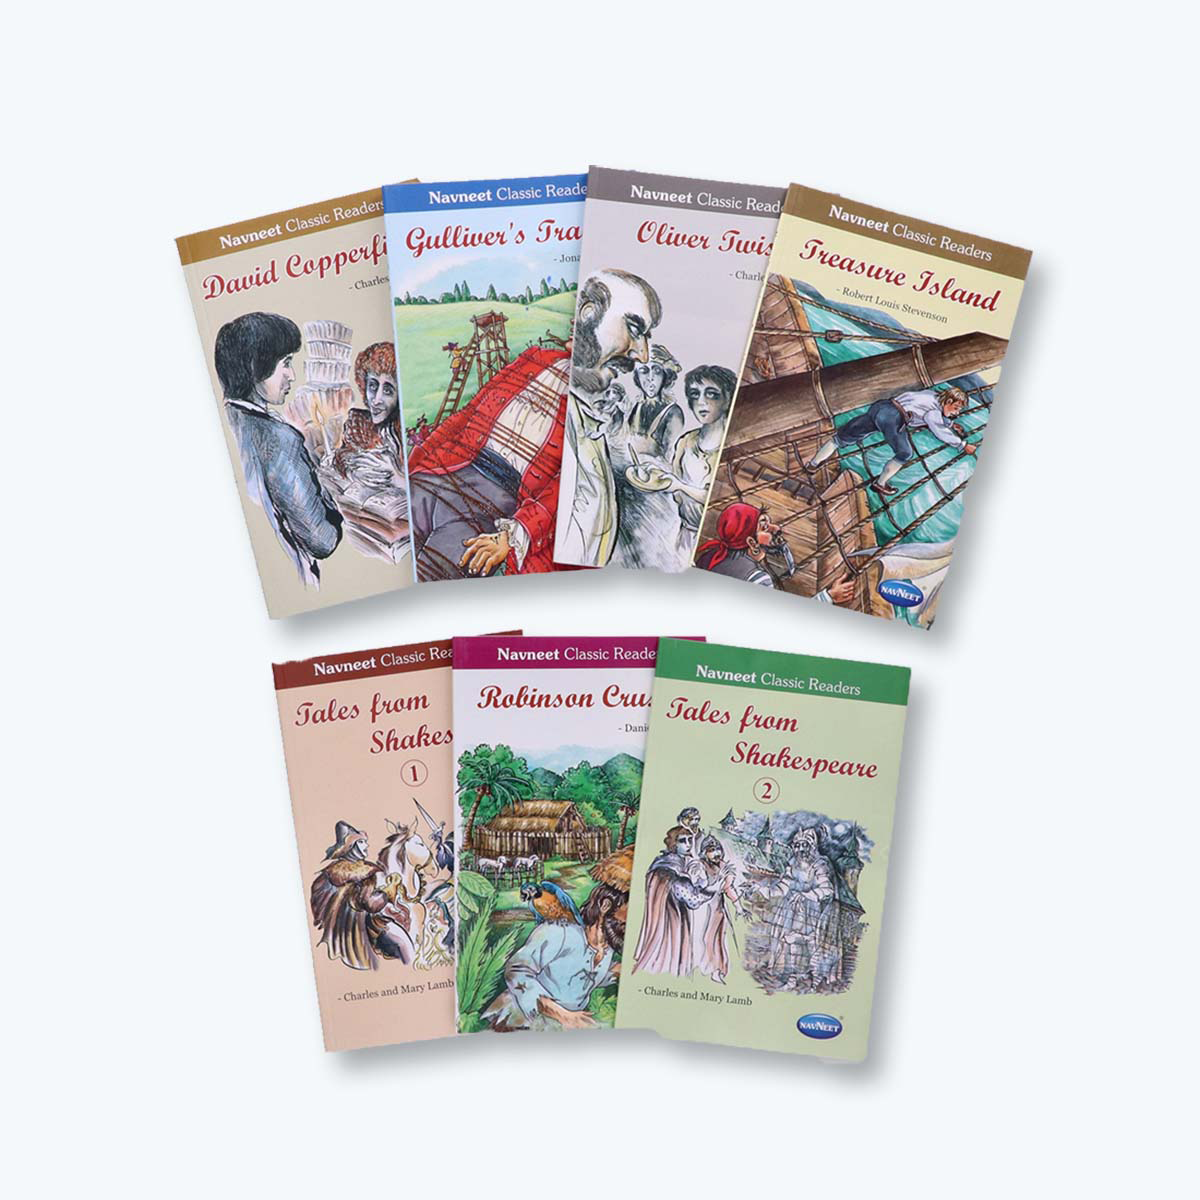 Navneet Classic Readers for Children- 7 Storybooks- Treasure Island, Robinson Crusoe, Oliver Twist, Gulliver's Travels, Tales from Shakespeare 1 & 2